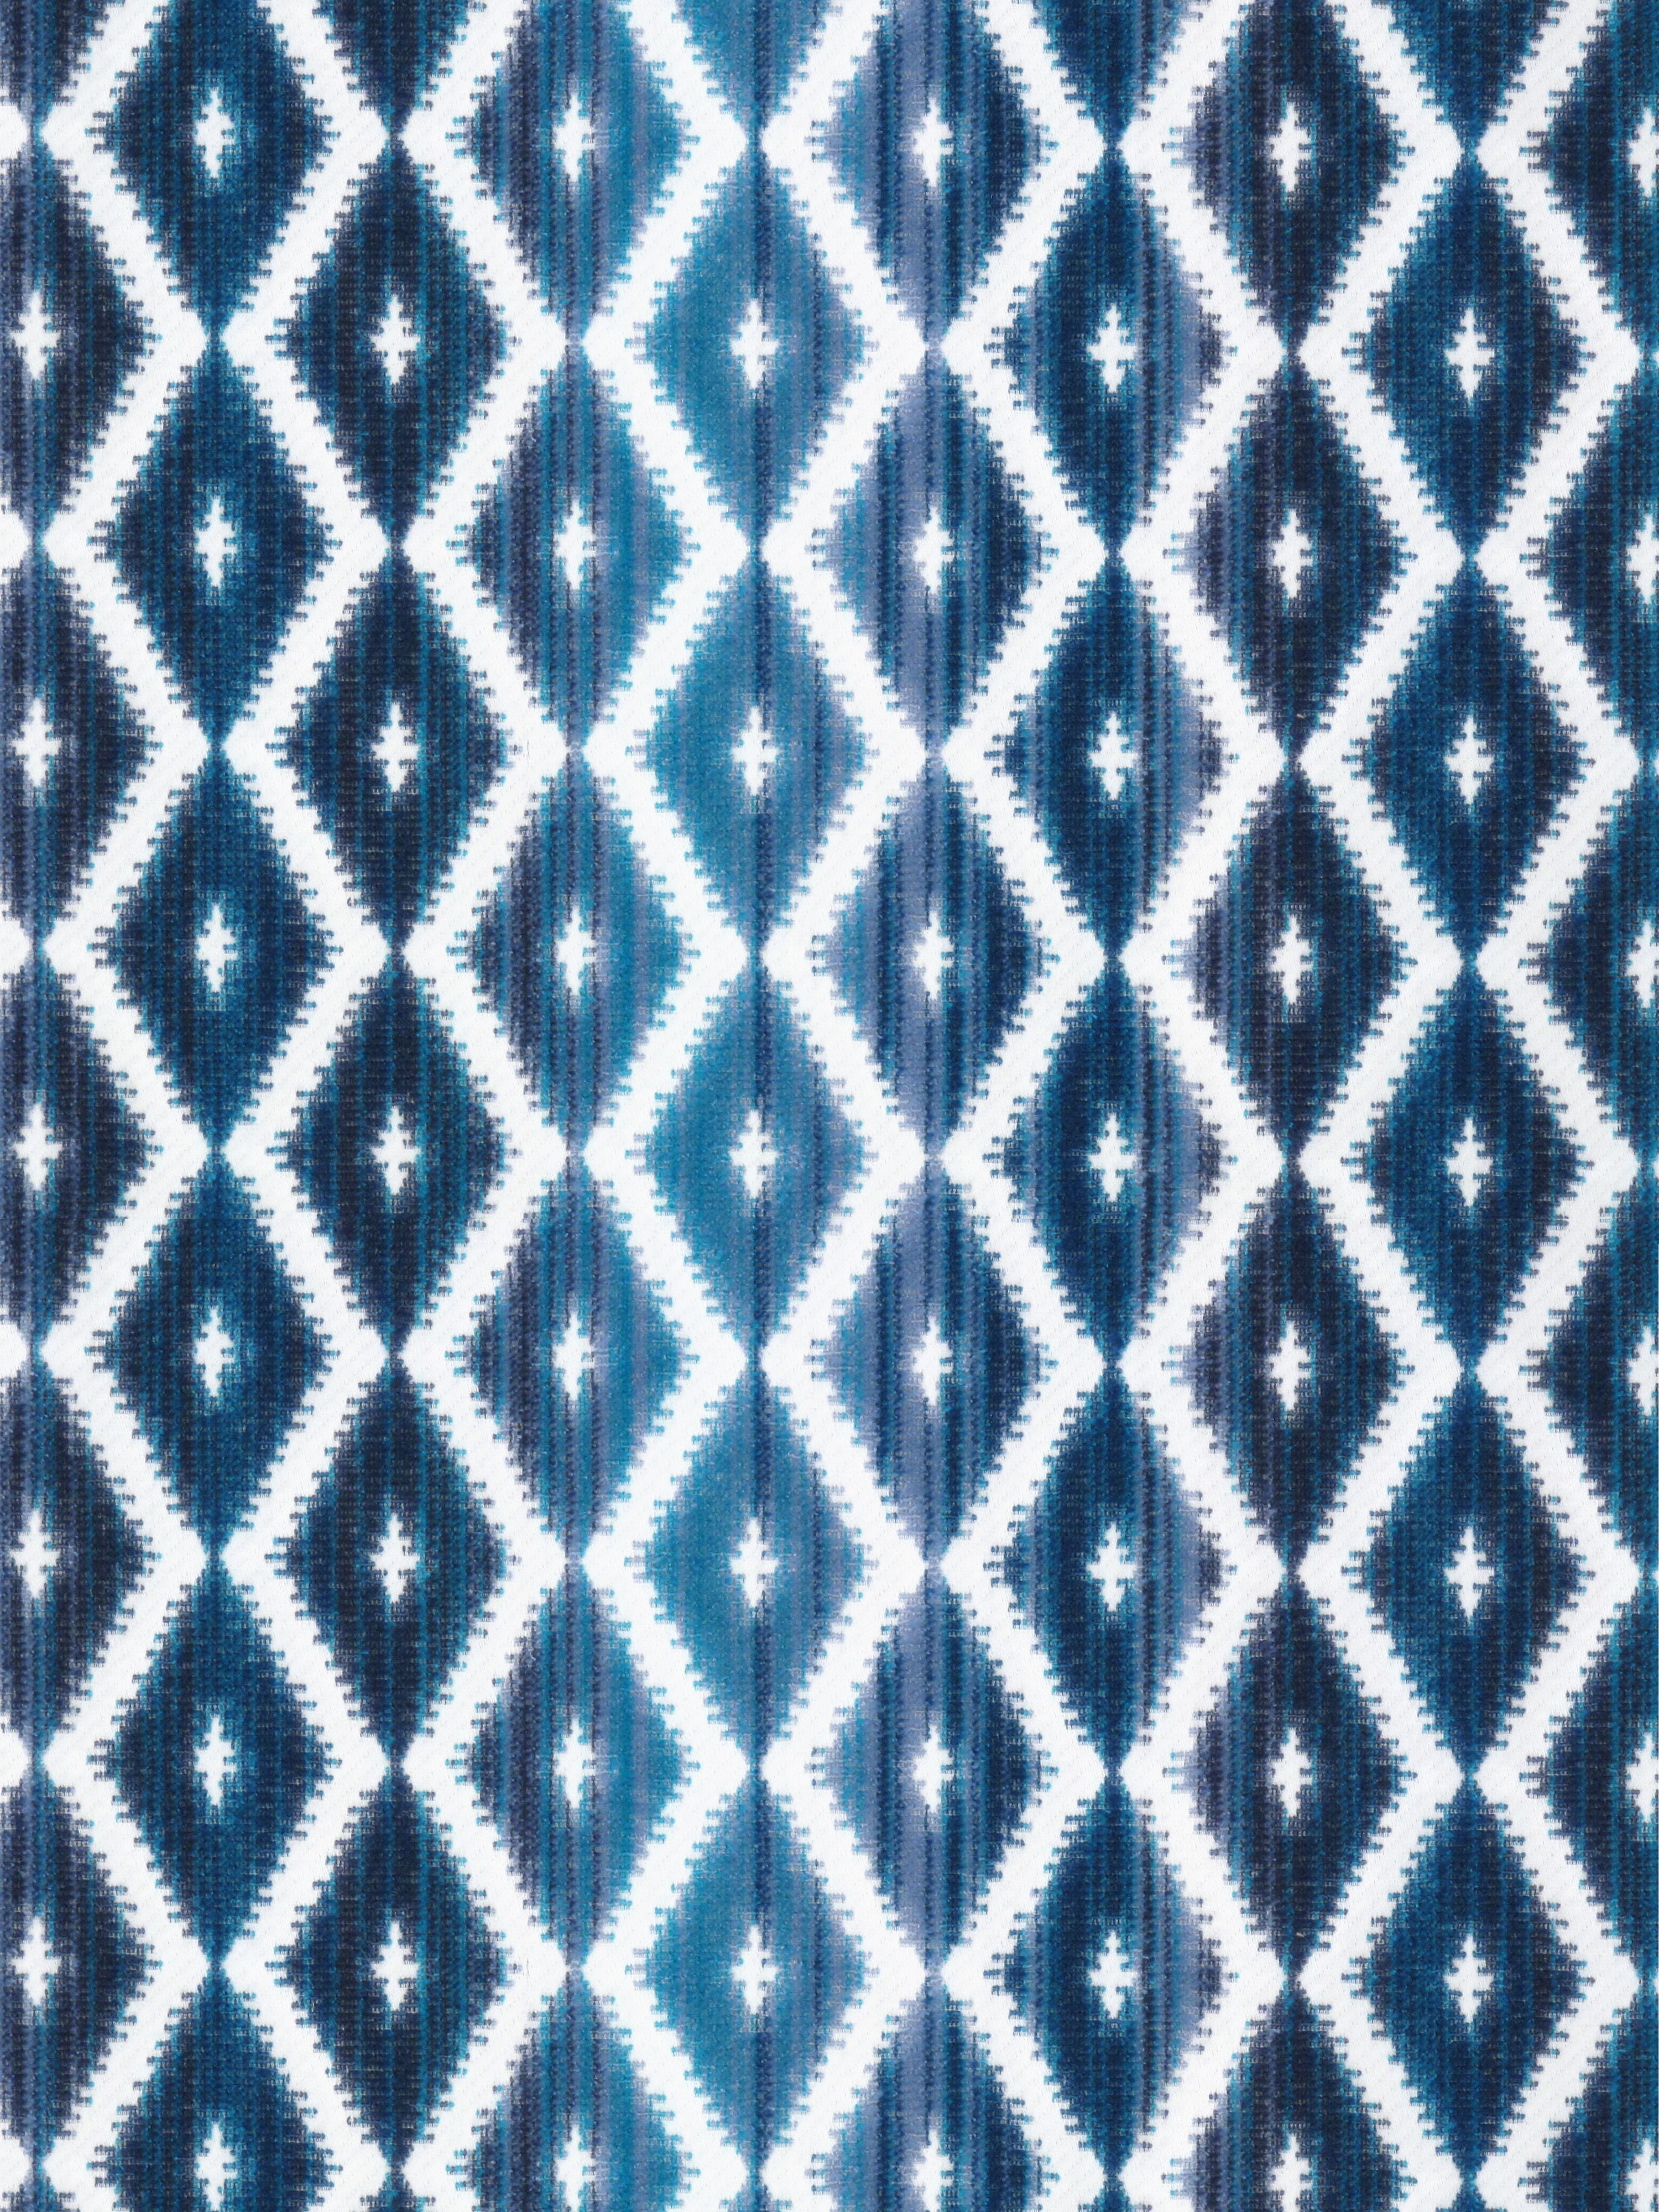 Diamantina fabric in blue marine color - pattern number SI 00041316 - by Scalamandre in the Old World Weavers collection